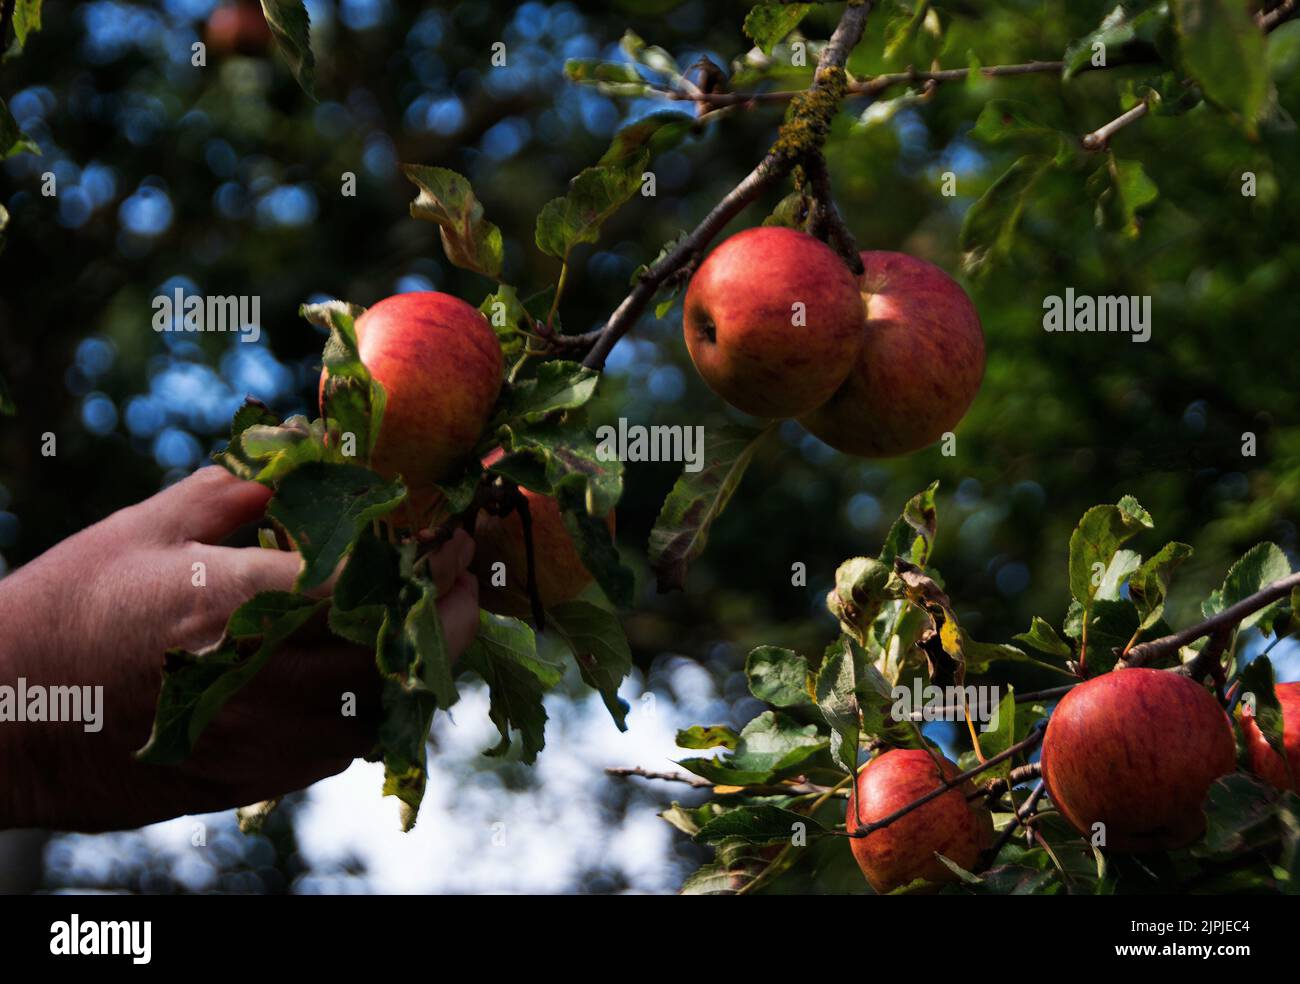 Picking a Cox's Orange Pippin apple in an old orchard Stock Photo